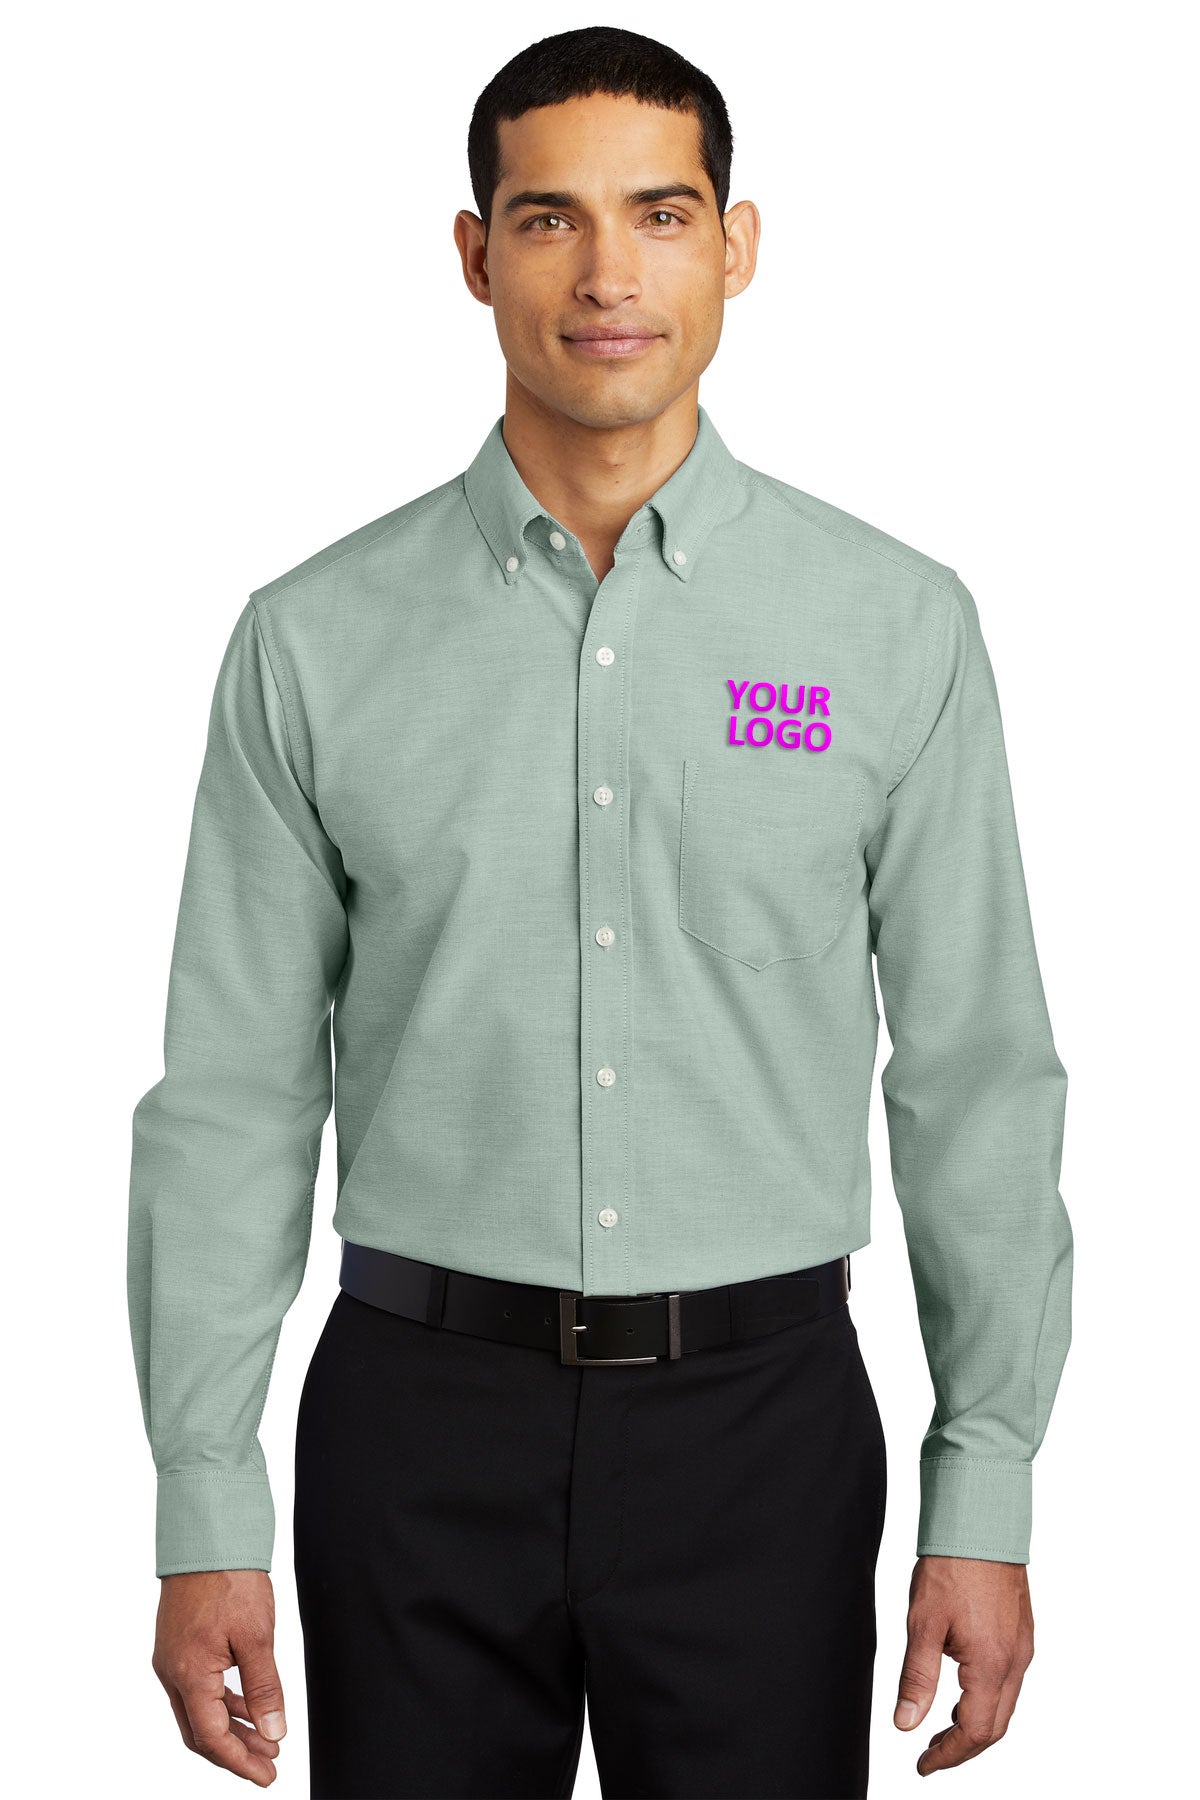 Port Authority Green S658 custom embroidered shirts